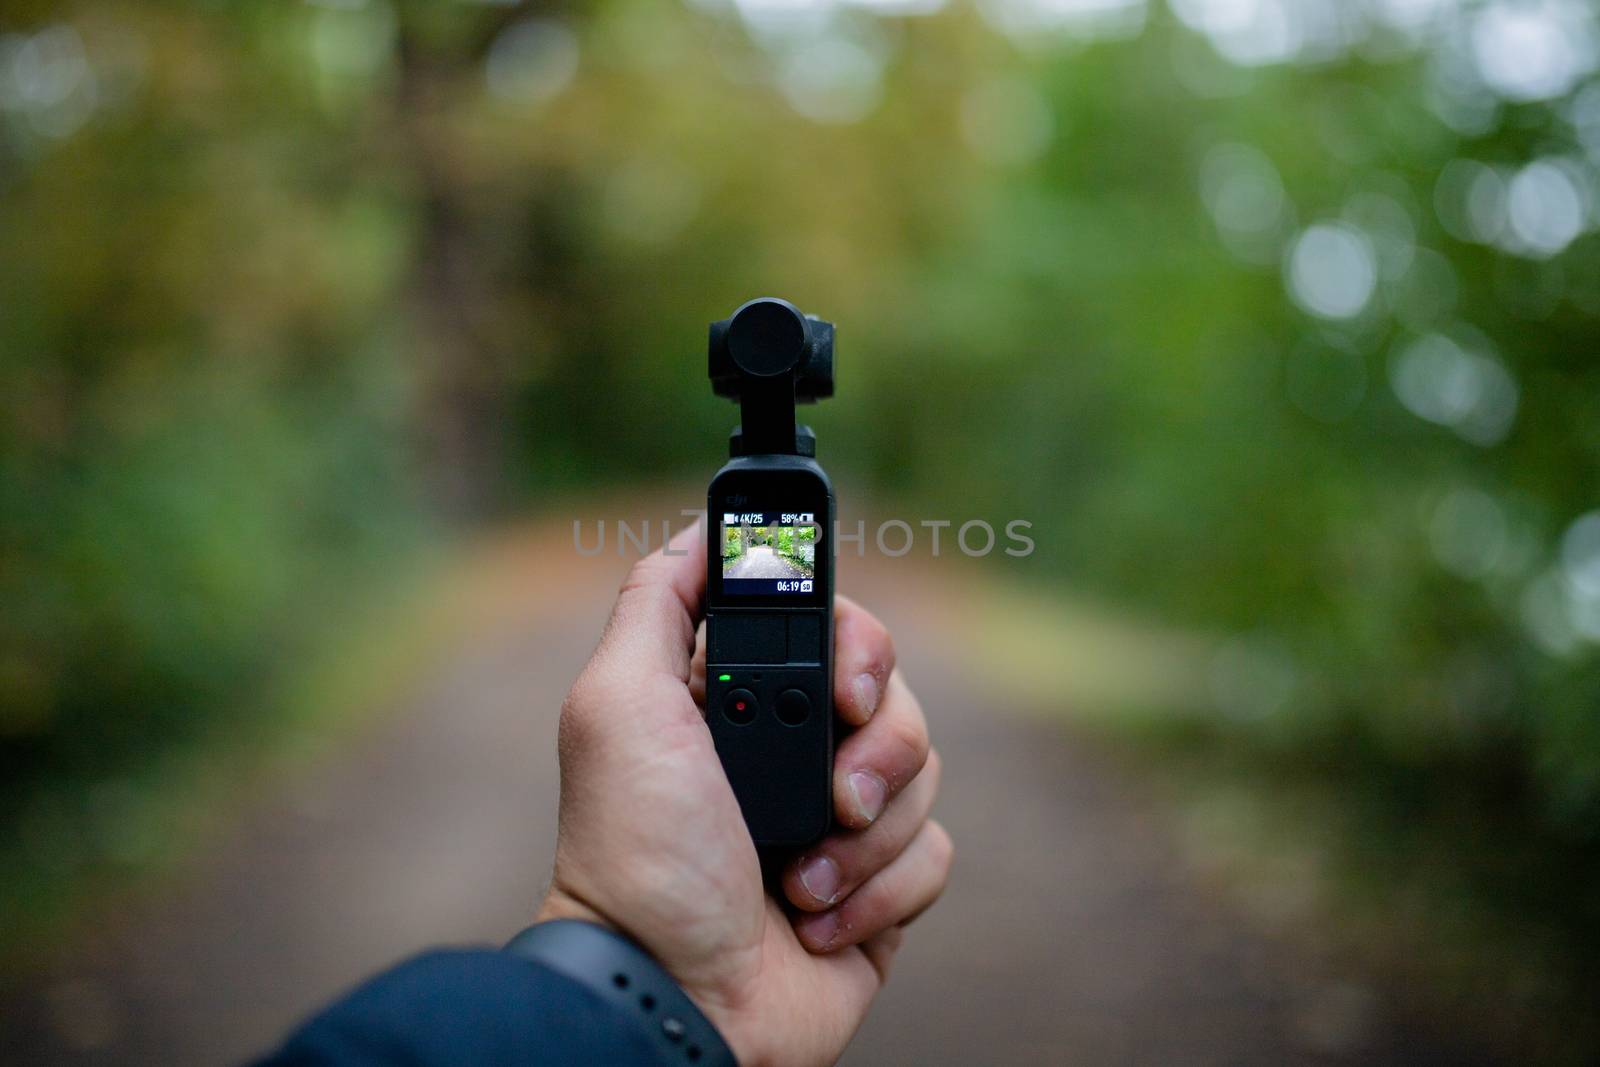 London, UK - December 1, 2018: Landscape View of a Hand Holding an DJI Osmo Pocket Camera Gimbal Recording the Blurry Forest in the background